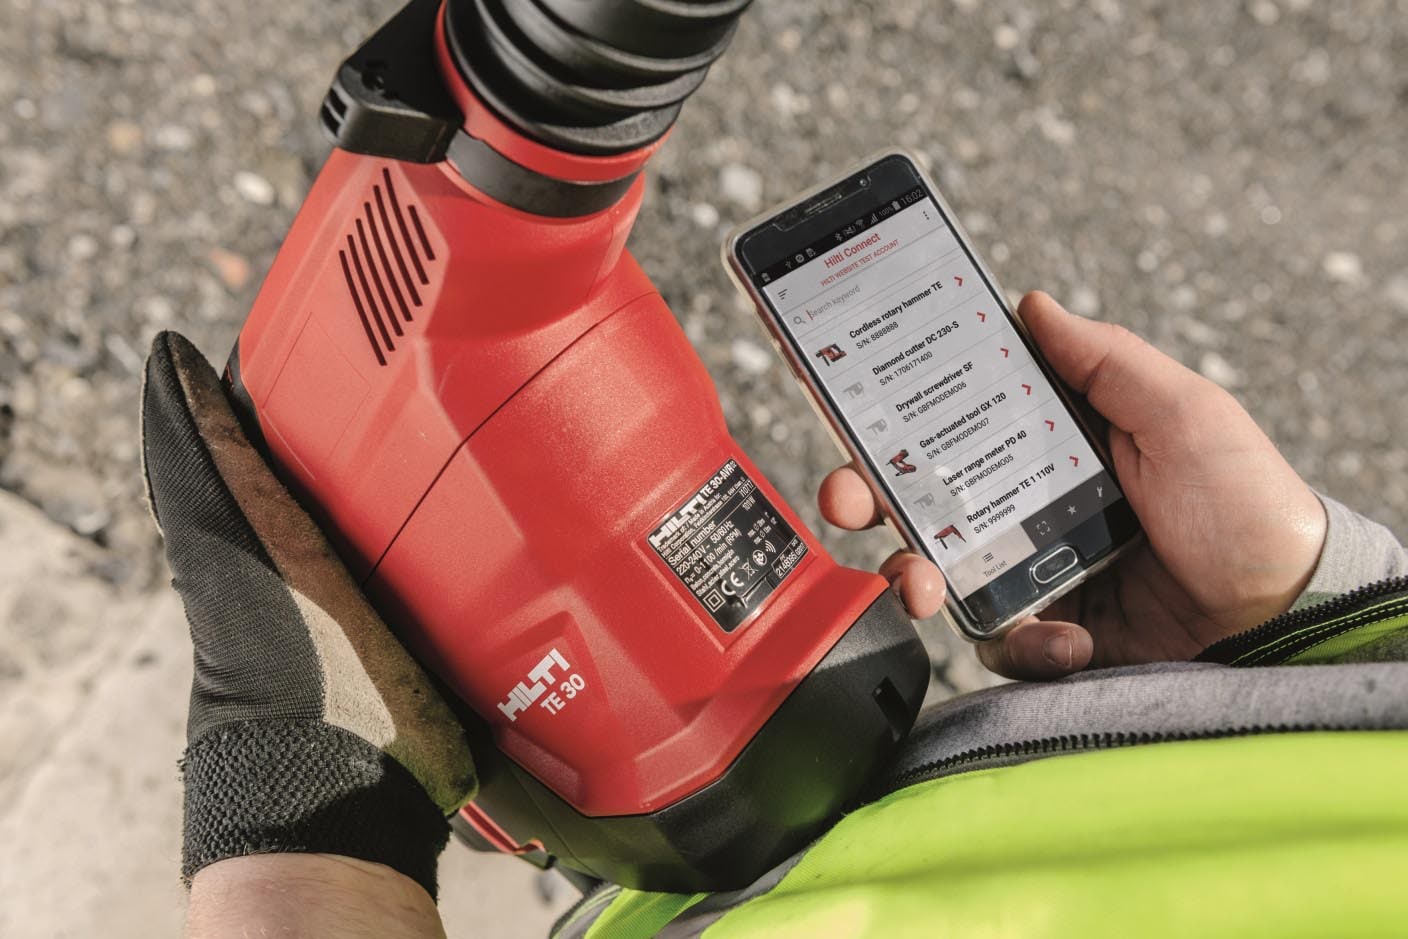 a contractor scans a tool with the hilti connect app